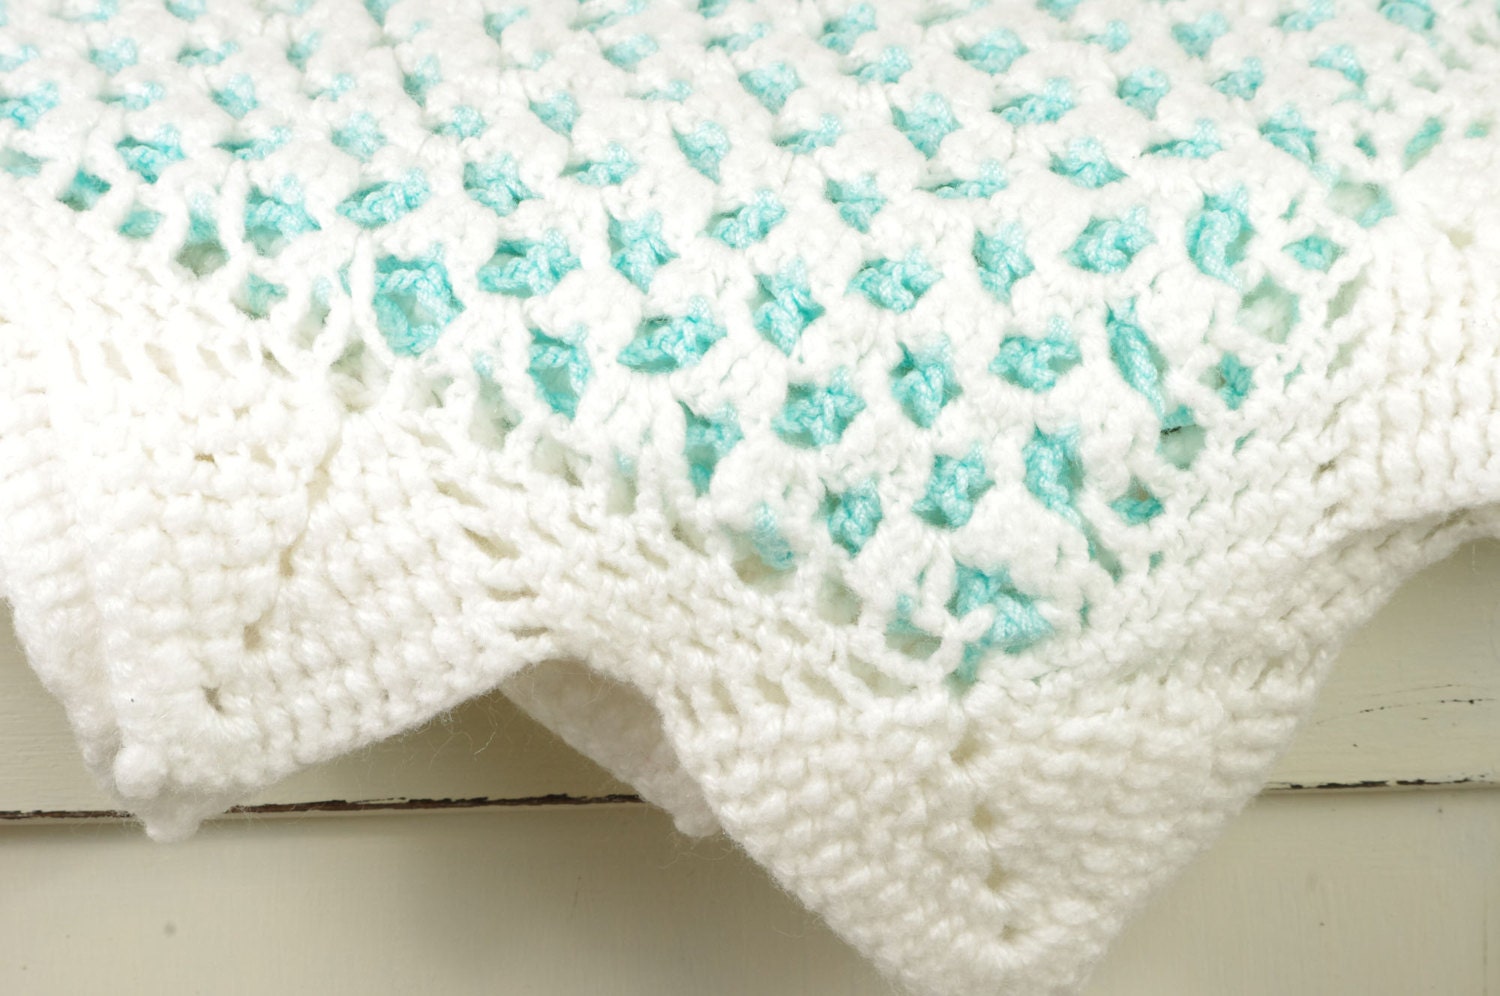 Vintage White and Aqua Blue Crocheted Blanket- Perfect for a Nursery or Newborn Photos